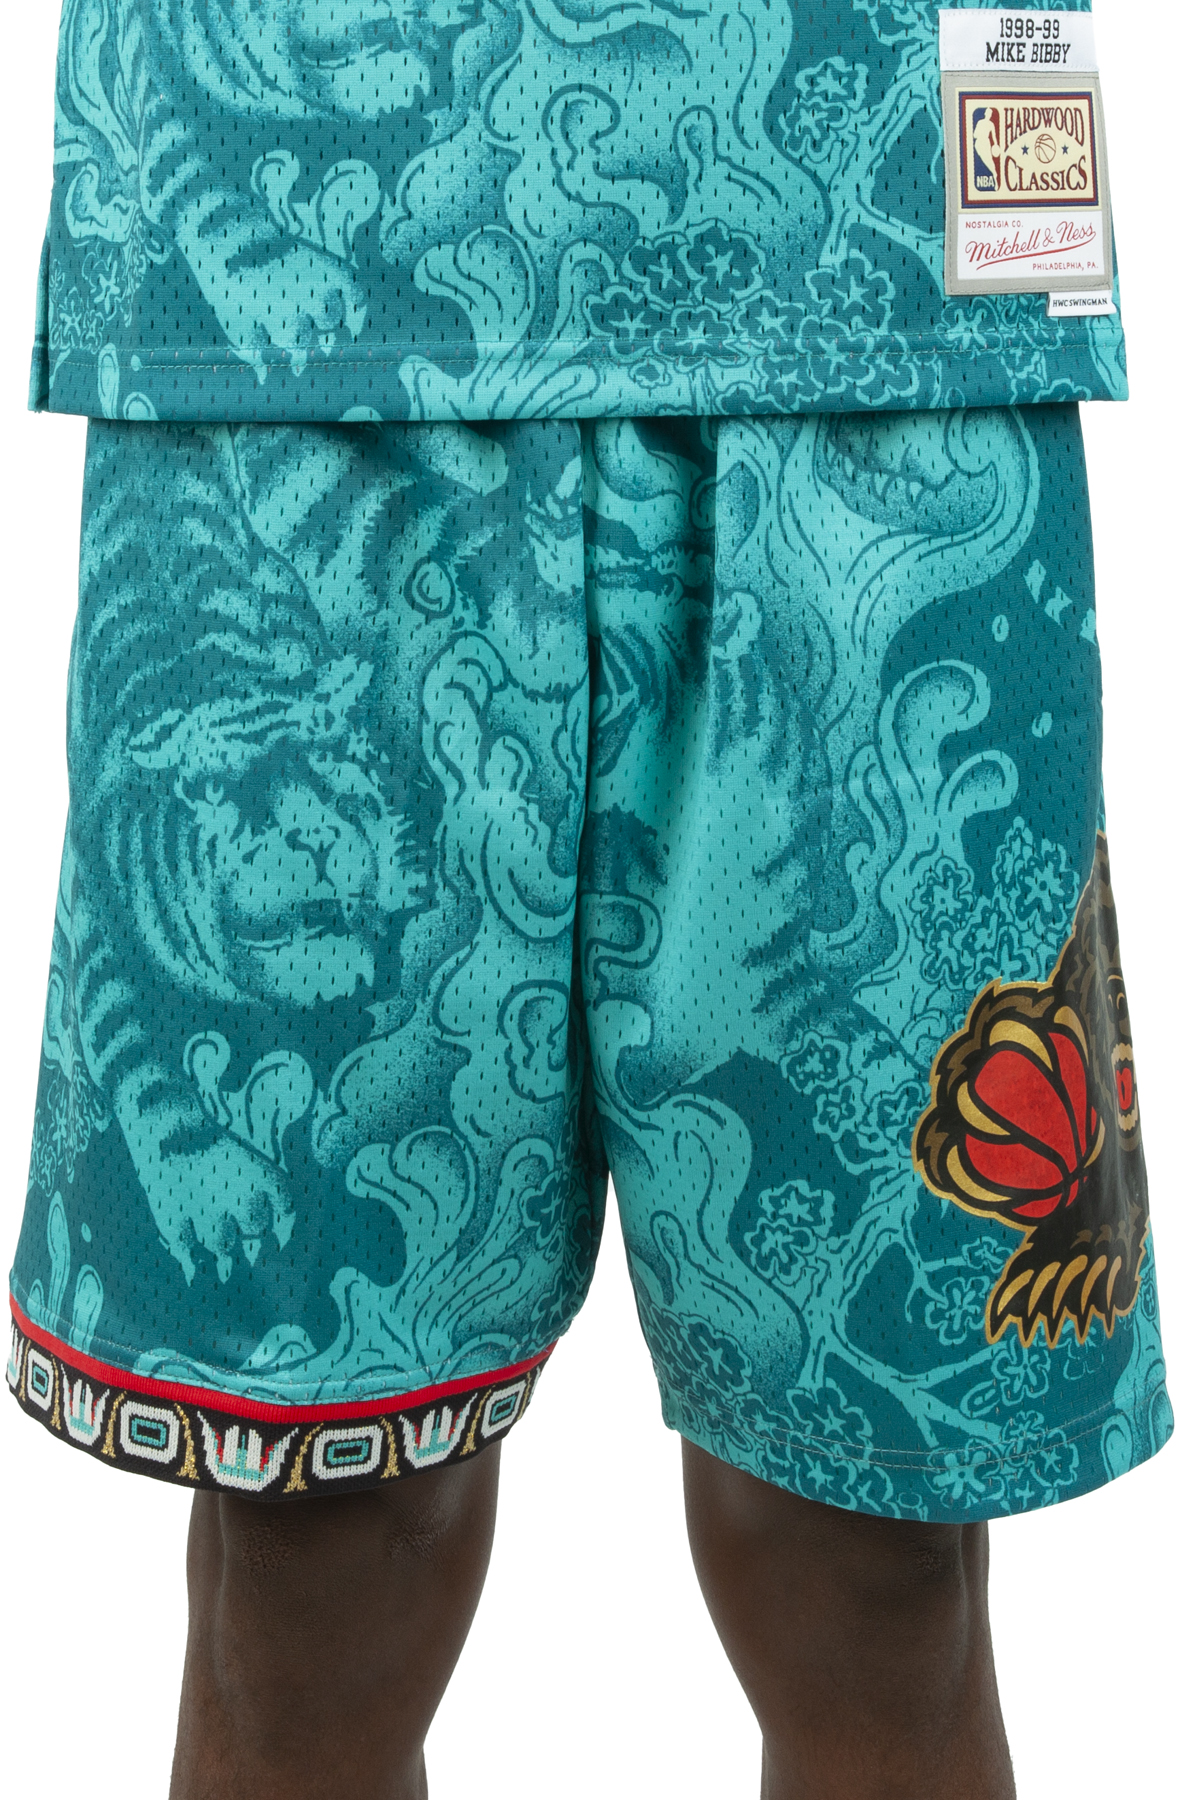 Mitchell & Ness Asian Heritage Swingman Vancouver Grizzlies 1996-97 Shorts